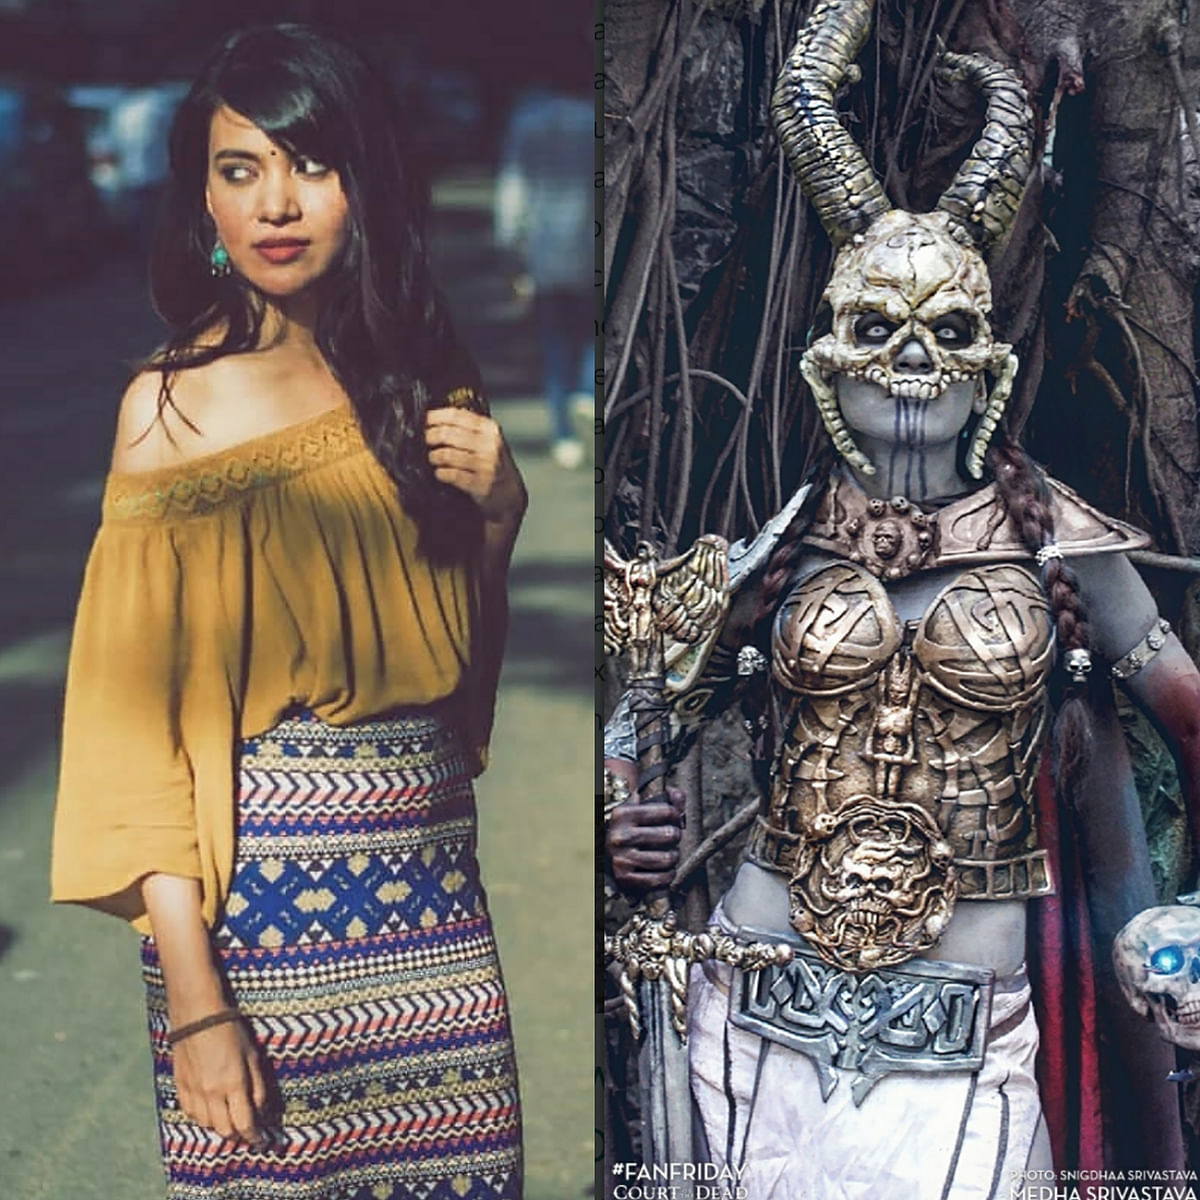 In India, cosplay is seeing a steady momentum in the industry.